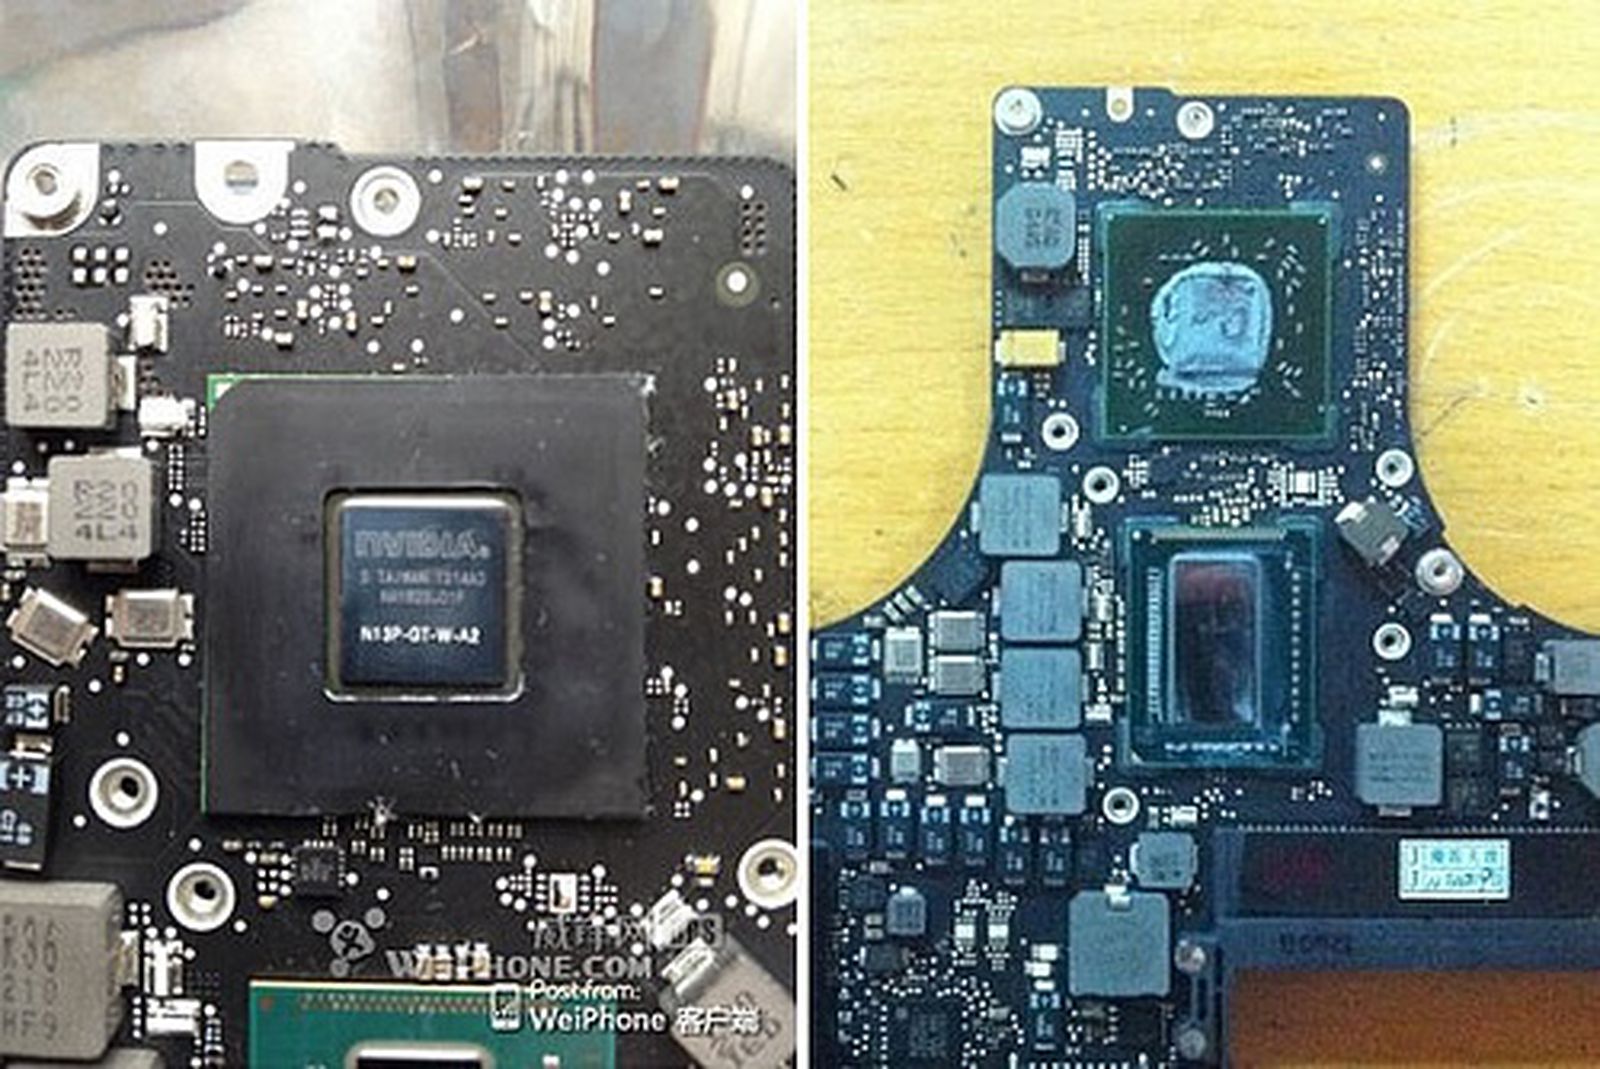 philosophy singer Treatment Photos of Claimed New 15-Inch MacBook Pro Logic Board Show NVIDIA GT 650M,  Retained Layout - MacRumors